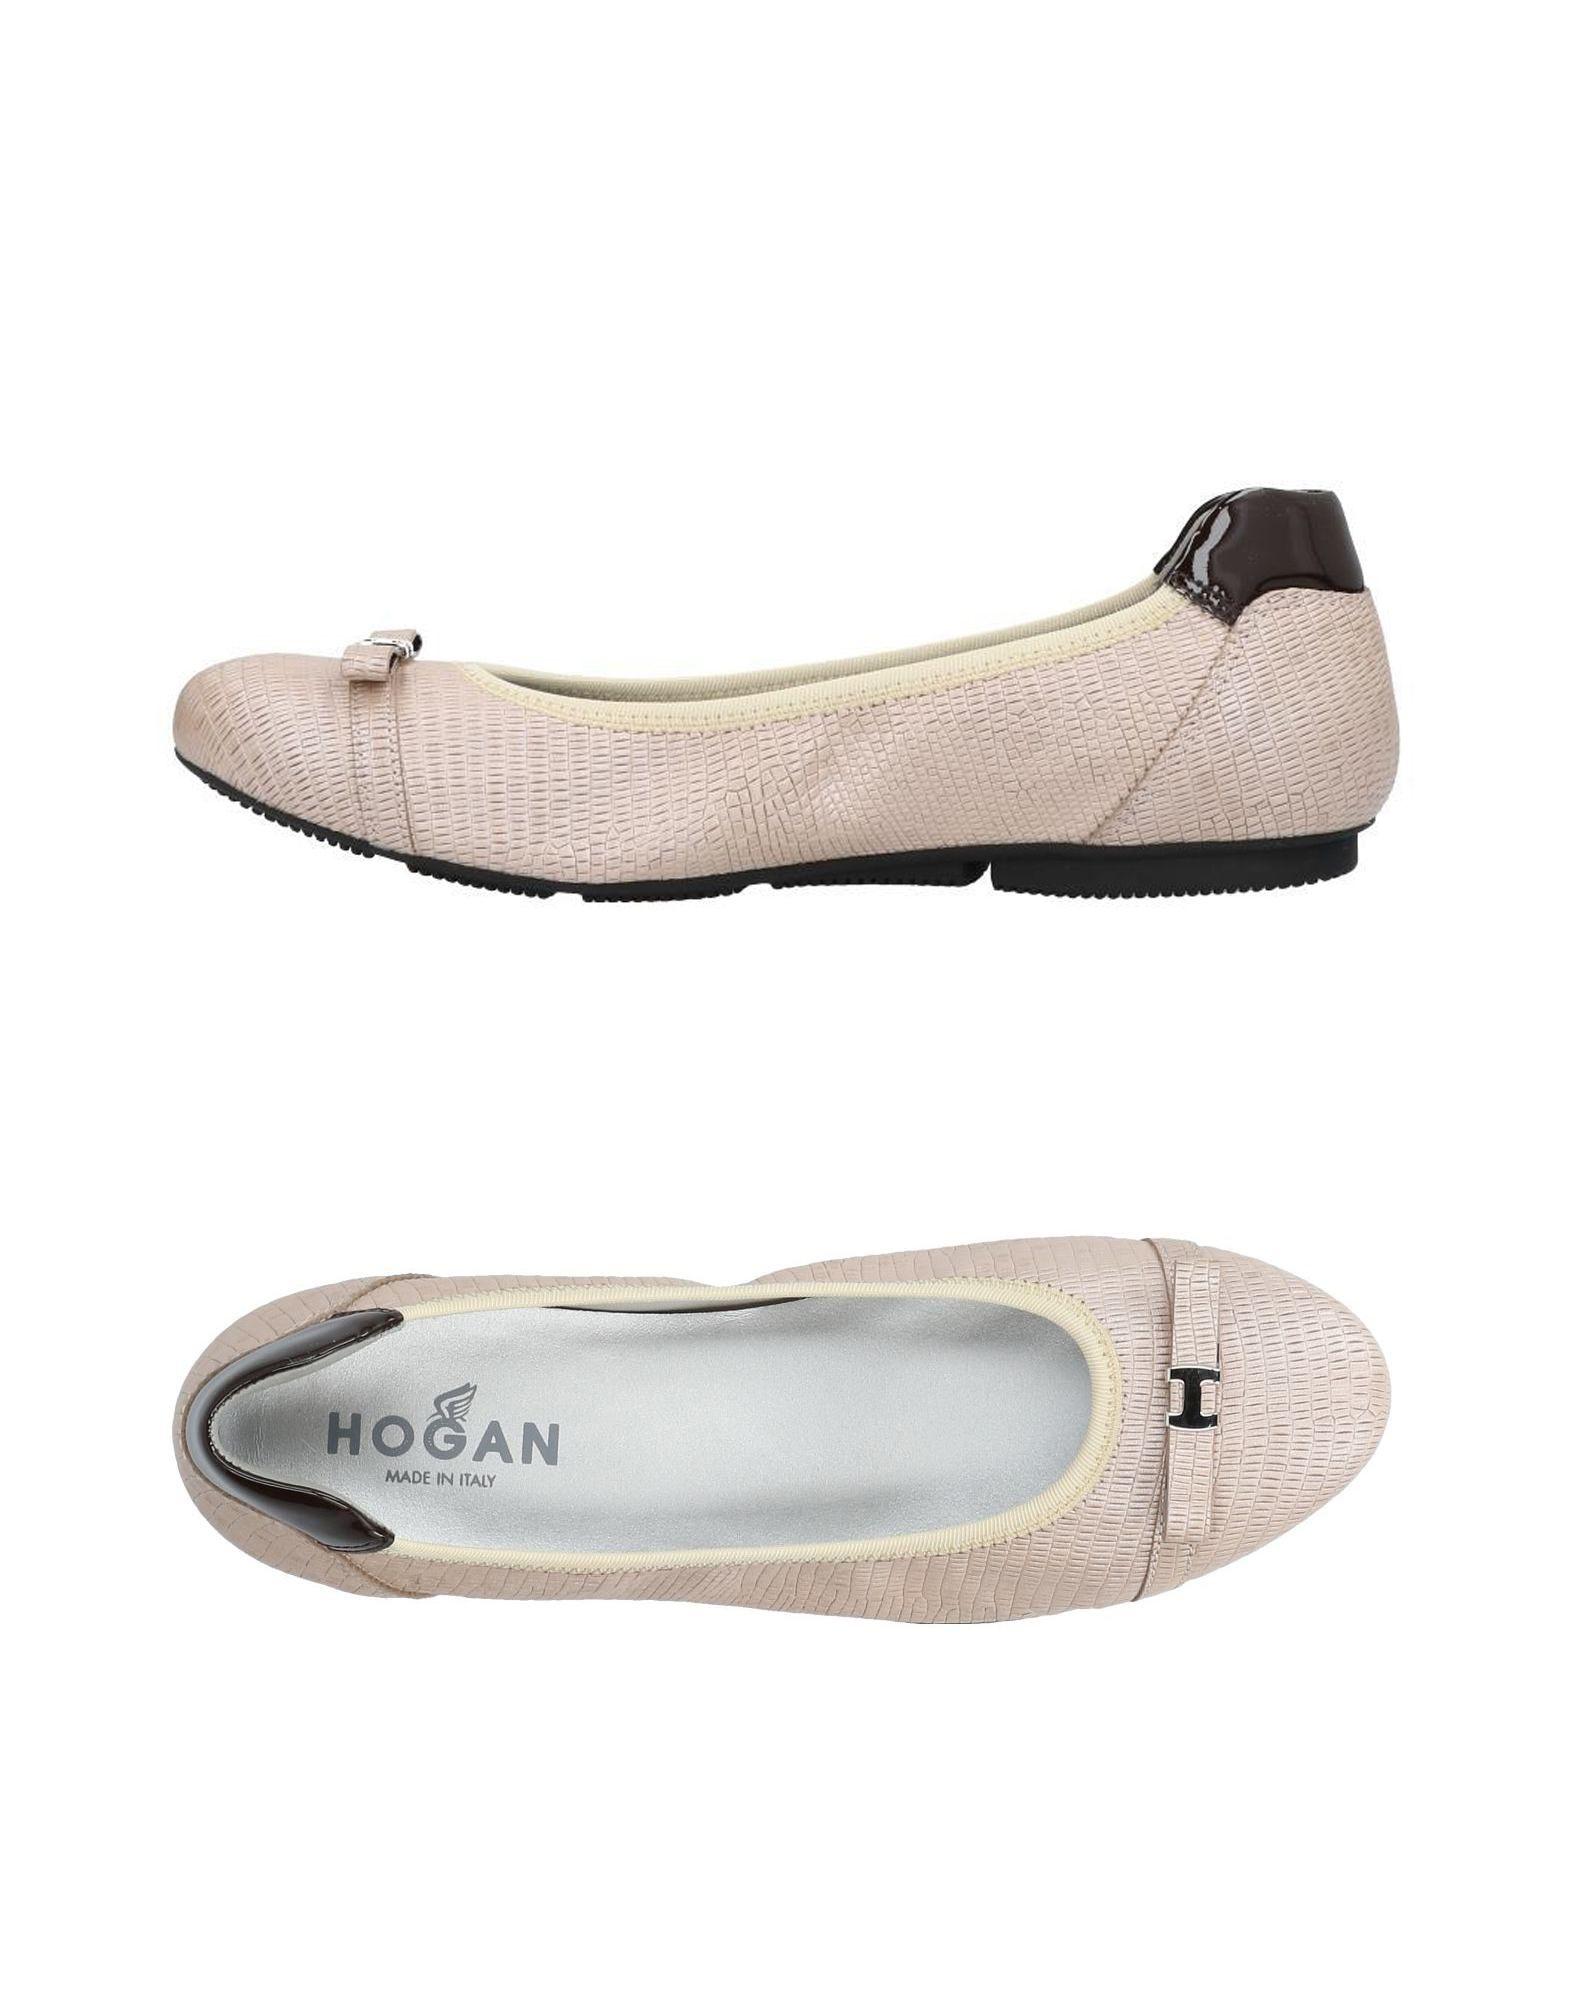 Hogan Leather Ballet Flats in Ivory 